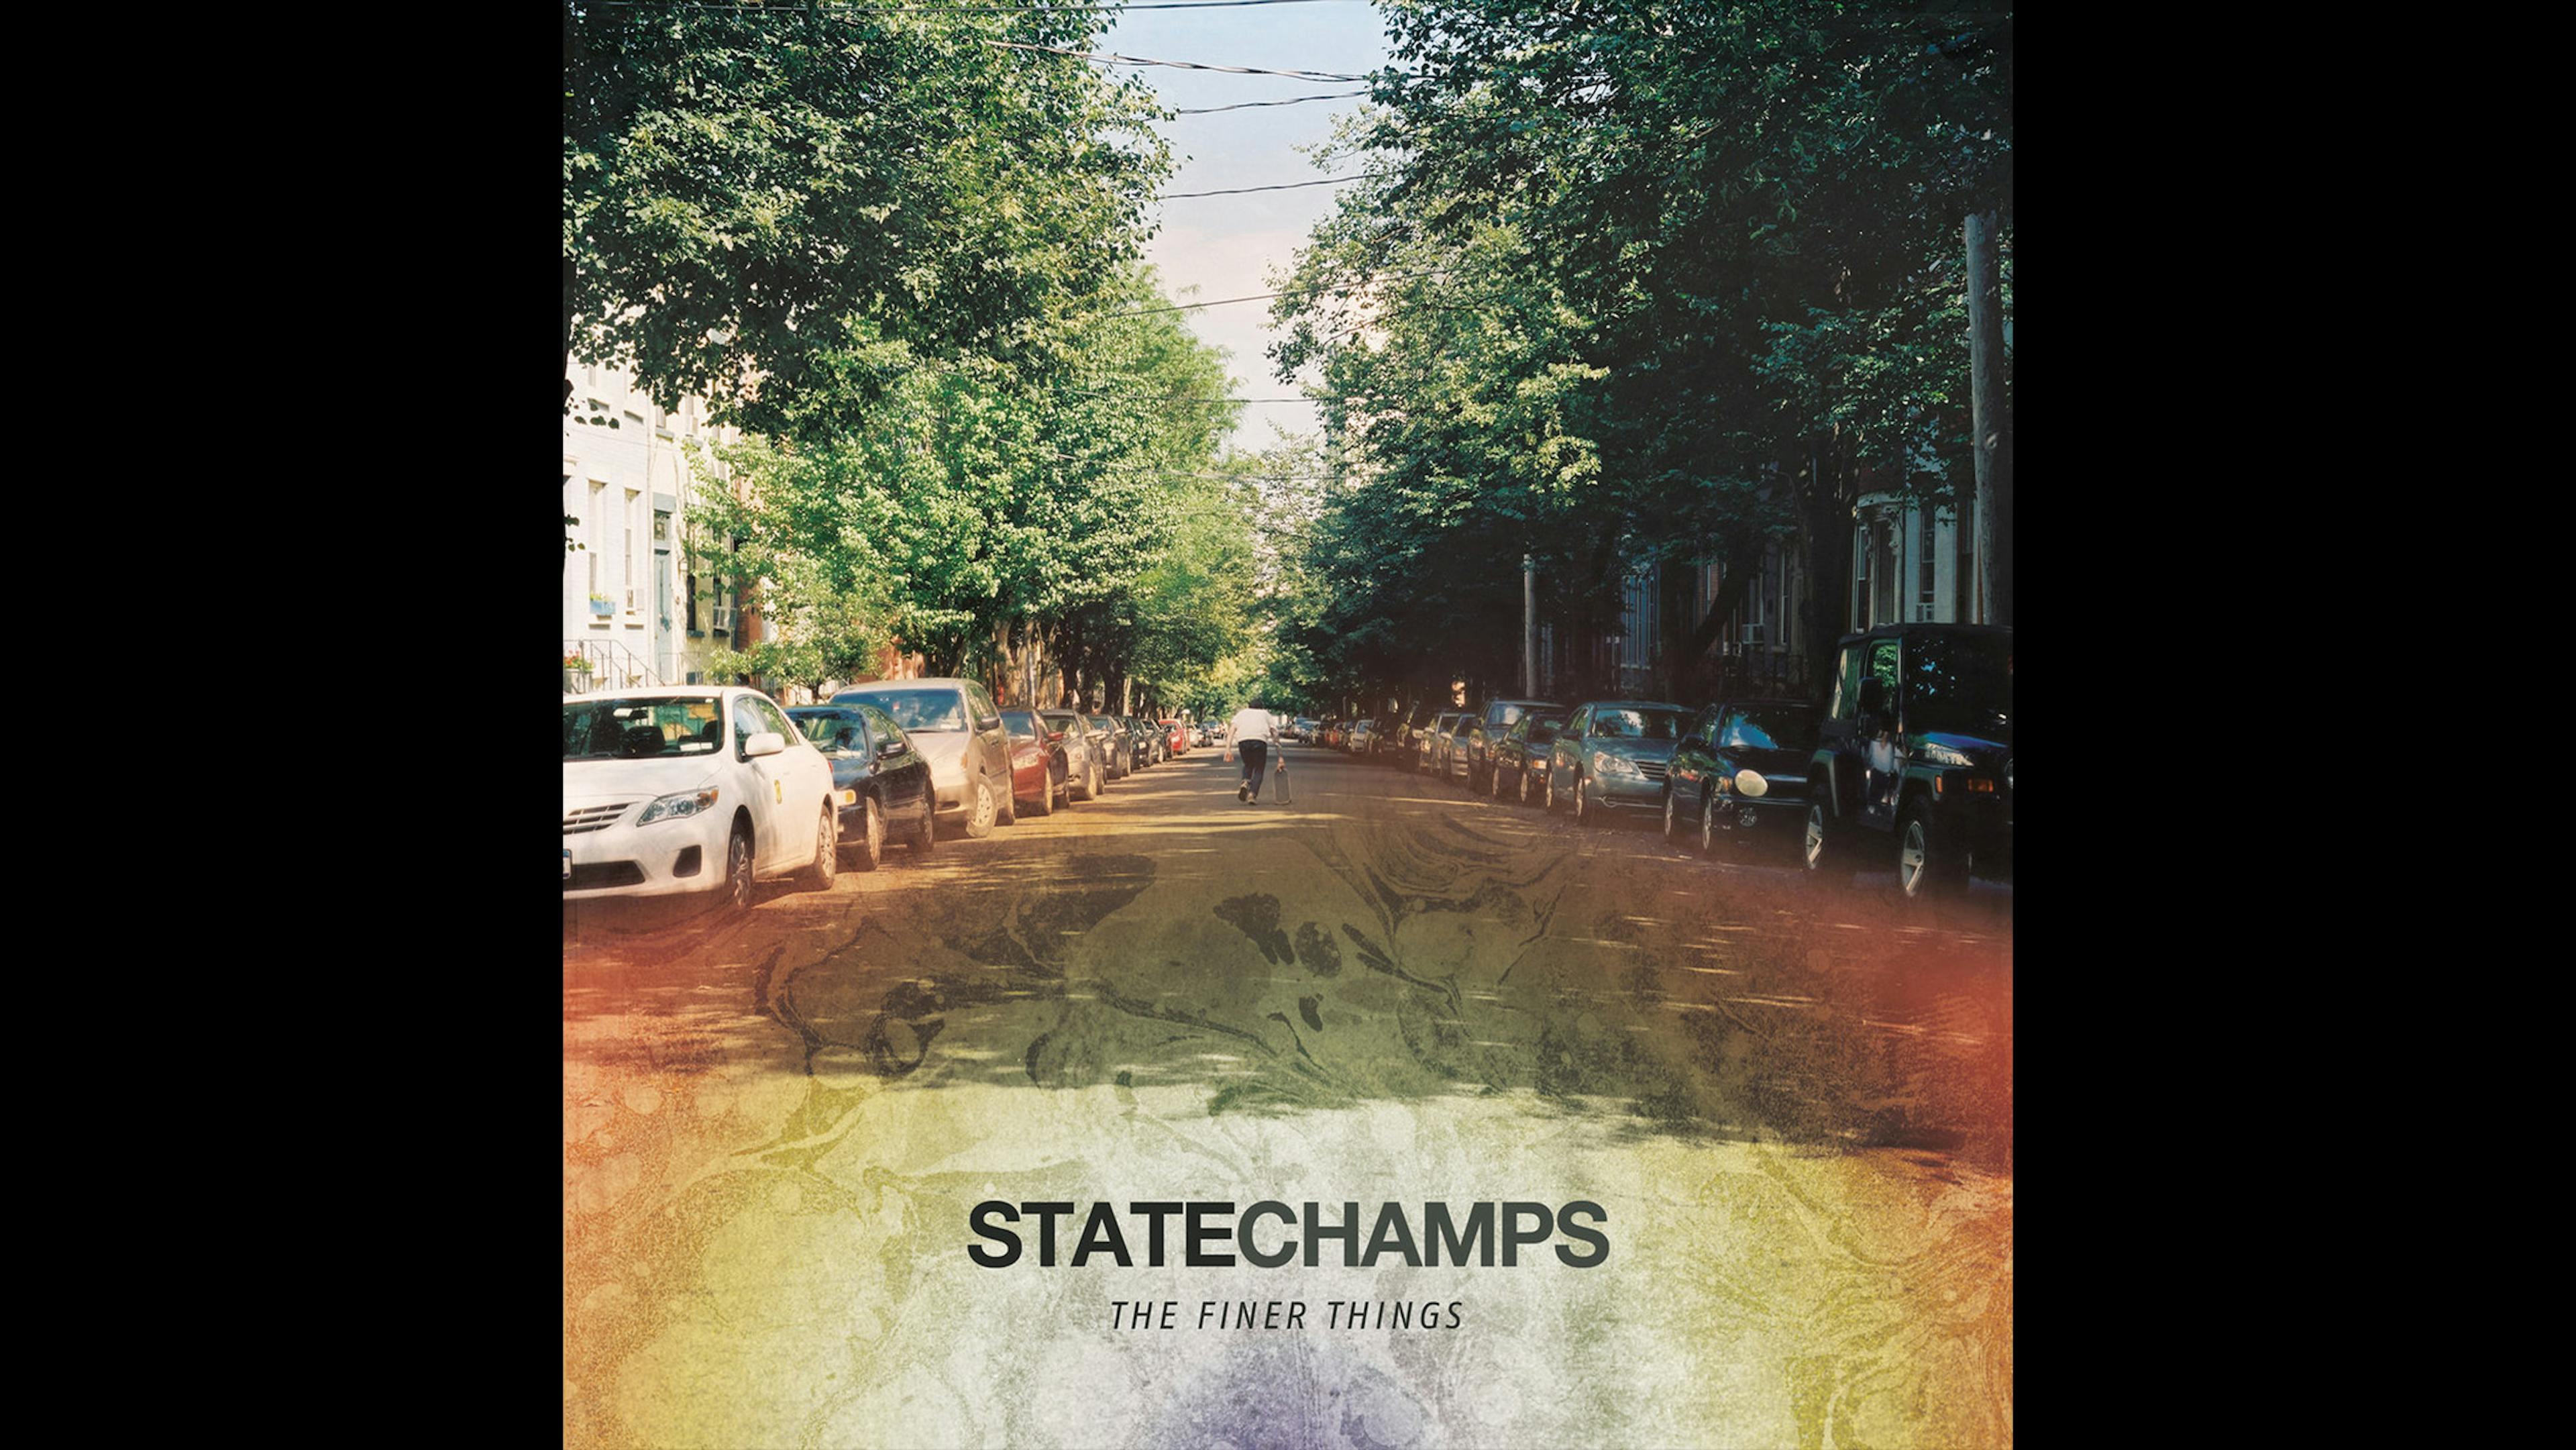 We asked State Champs frontman Derek Discanio why he felt this record connected so strongly with people:

“It’s just a very straight, heartfelt, fun, catchy pop-punk album. We really didn’t overthink it. We had no idea what we were doing, really, and we had no expectations for it. We just wanted to present ourselves to the world as the people we were, and I think we did that.”